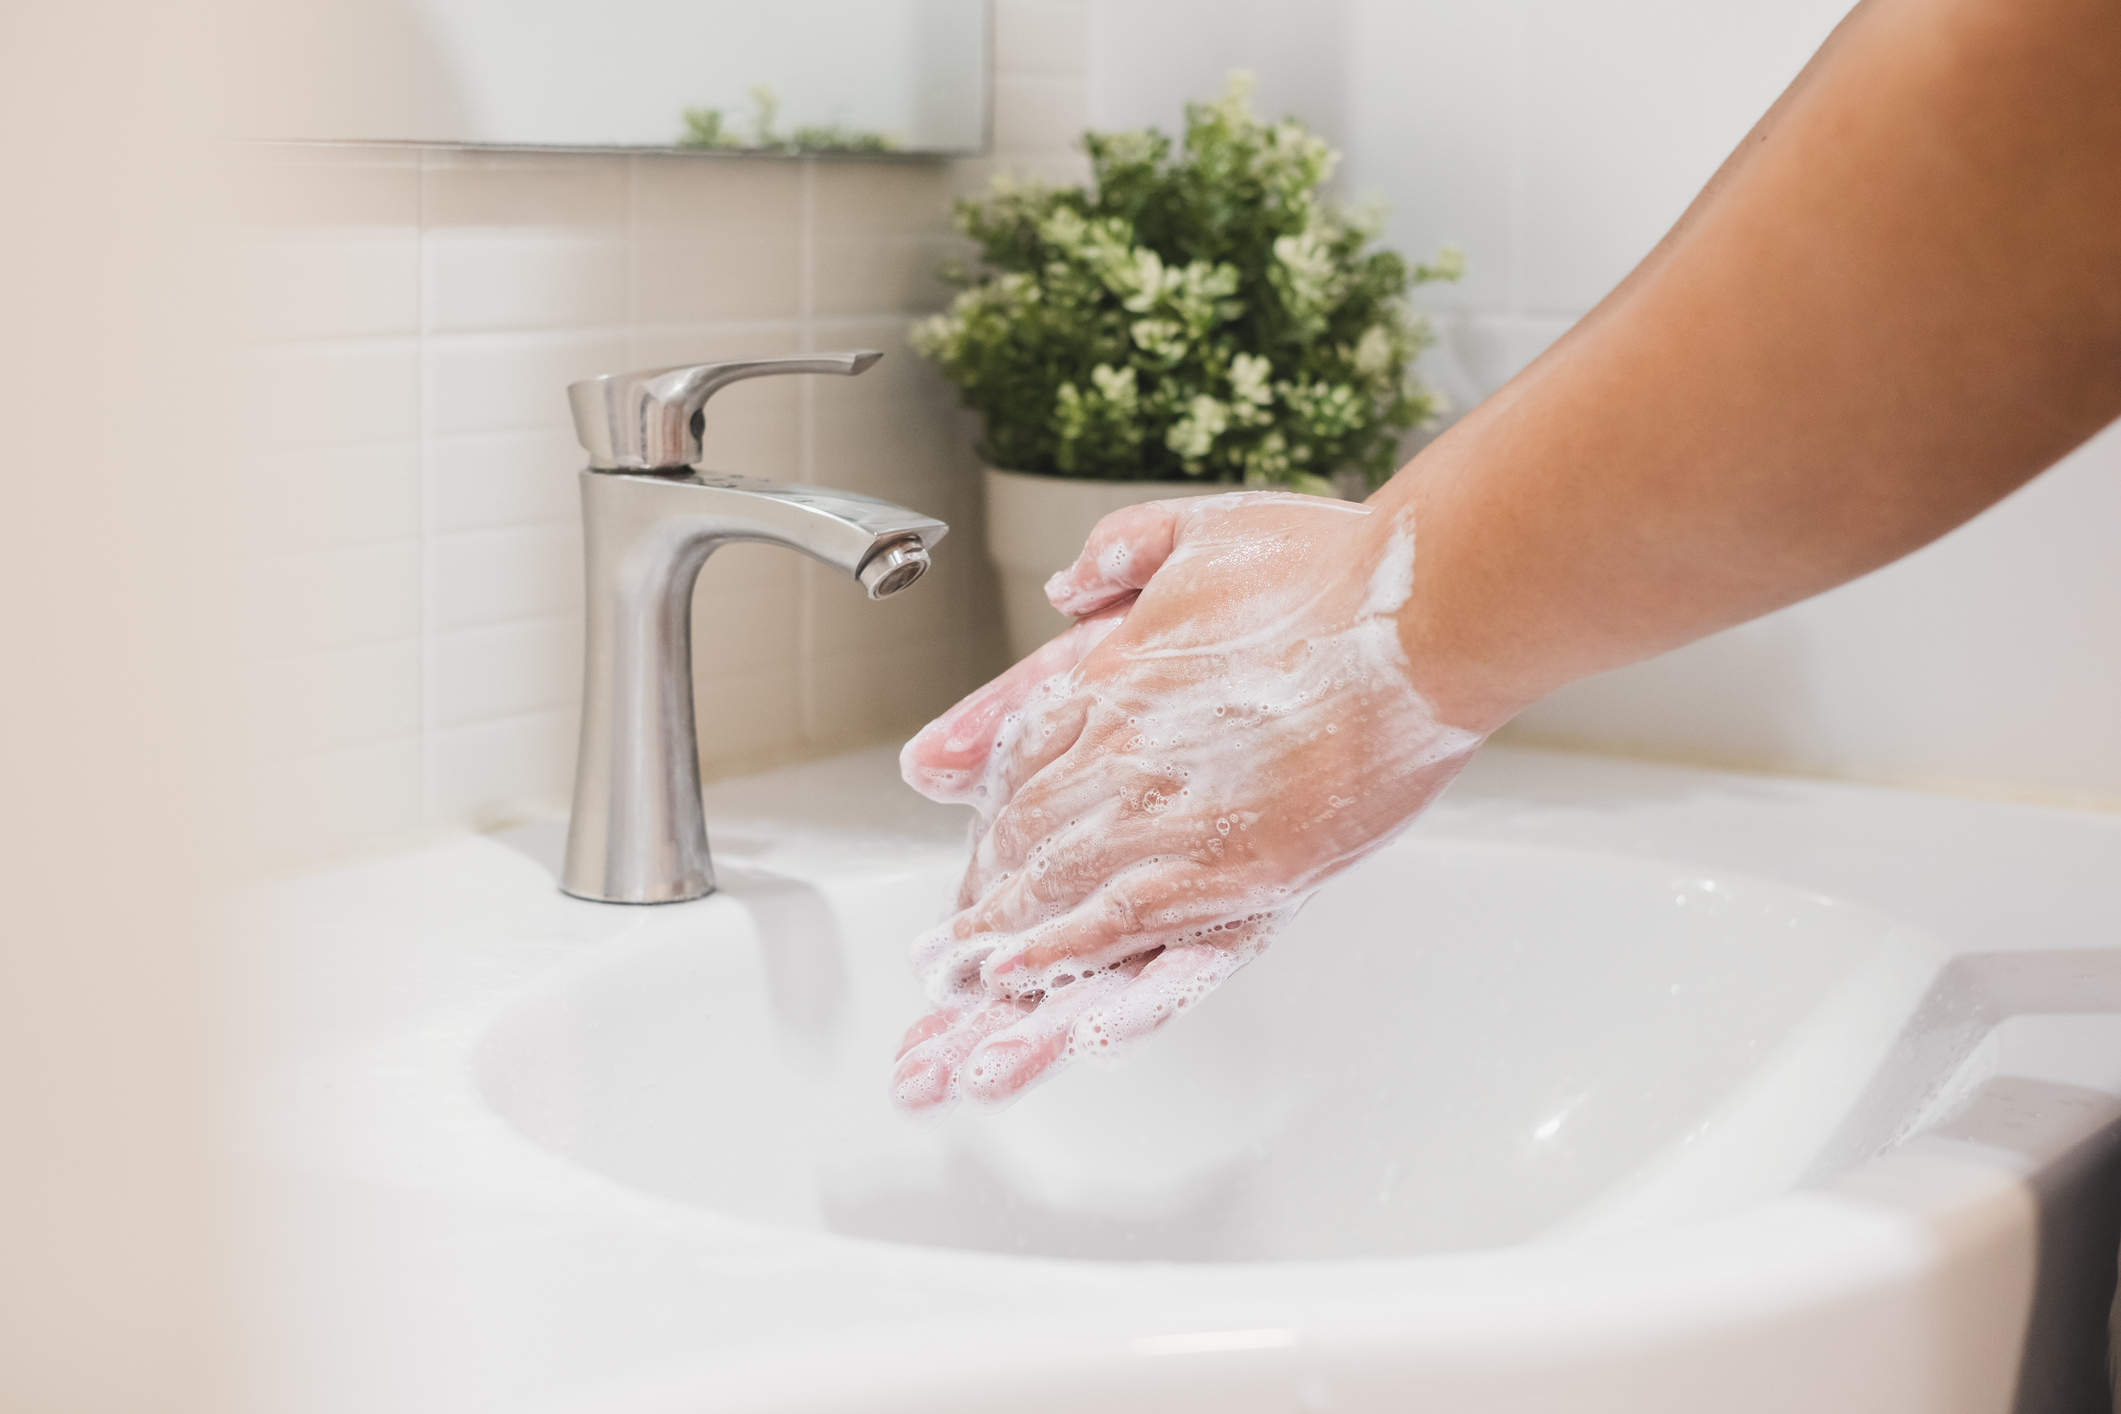 Is Hygiene Hurting Your Health?